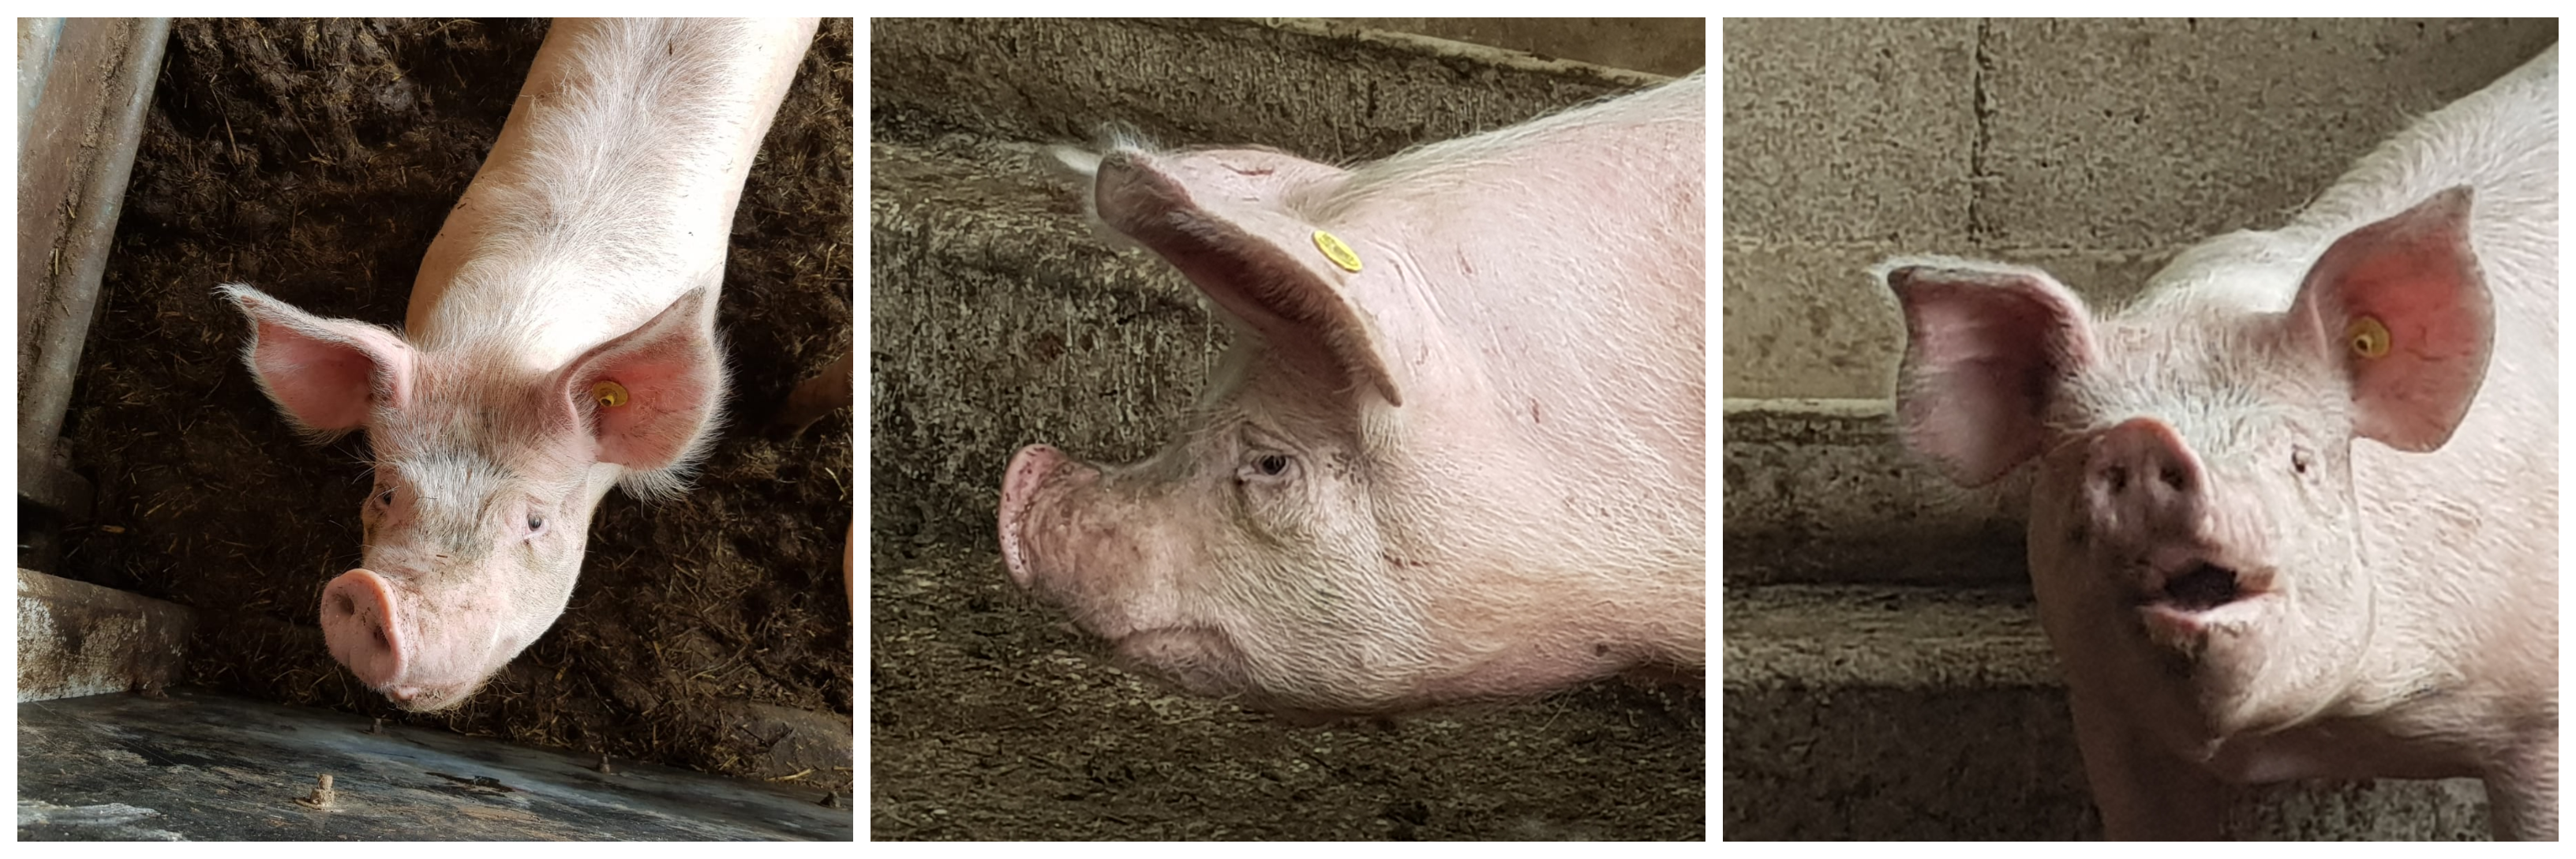 collage of 3 pictures of face and profile of a pig with deviated and shortened snout due to lesions from atrophic rhinitis